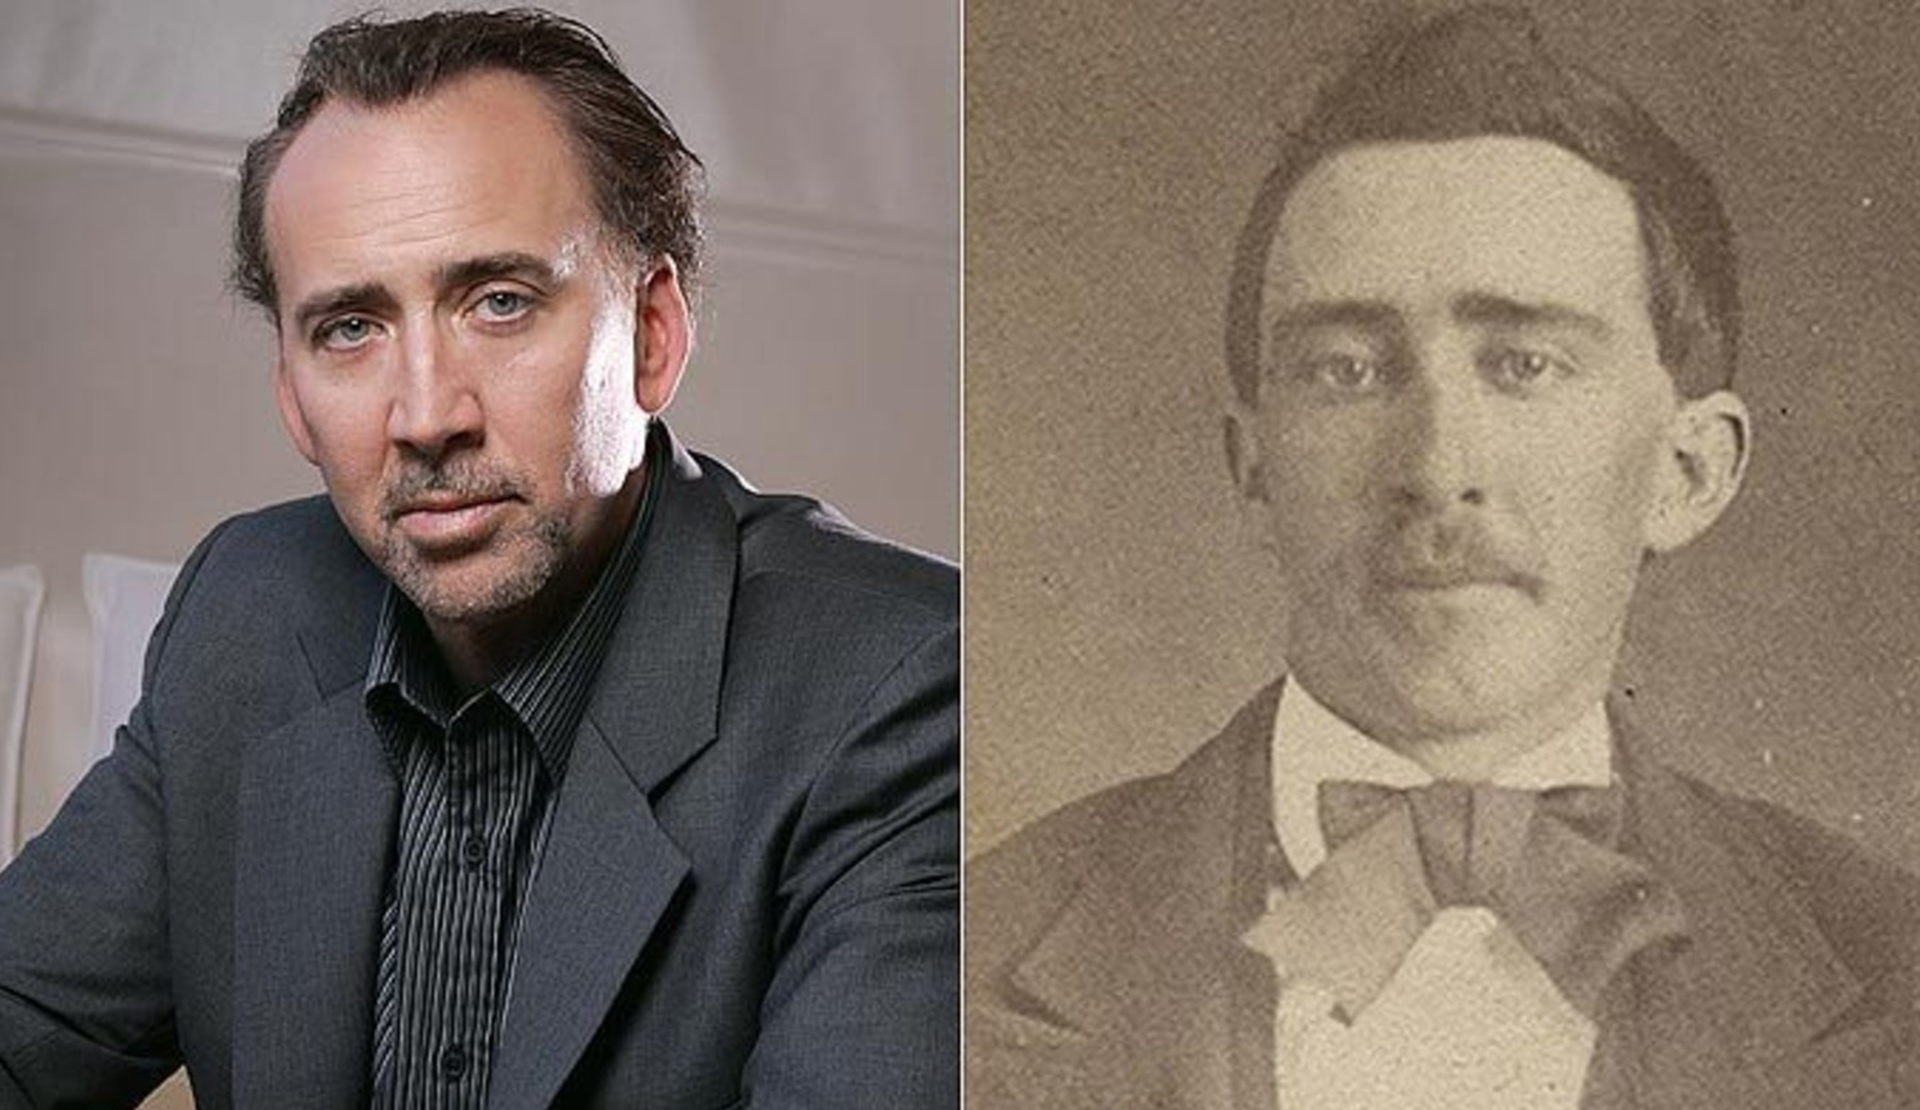 Nicolas Cage's resemblance to someone in the past